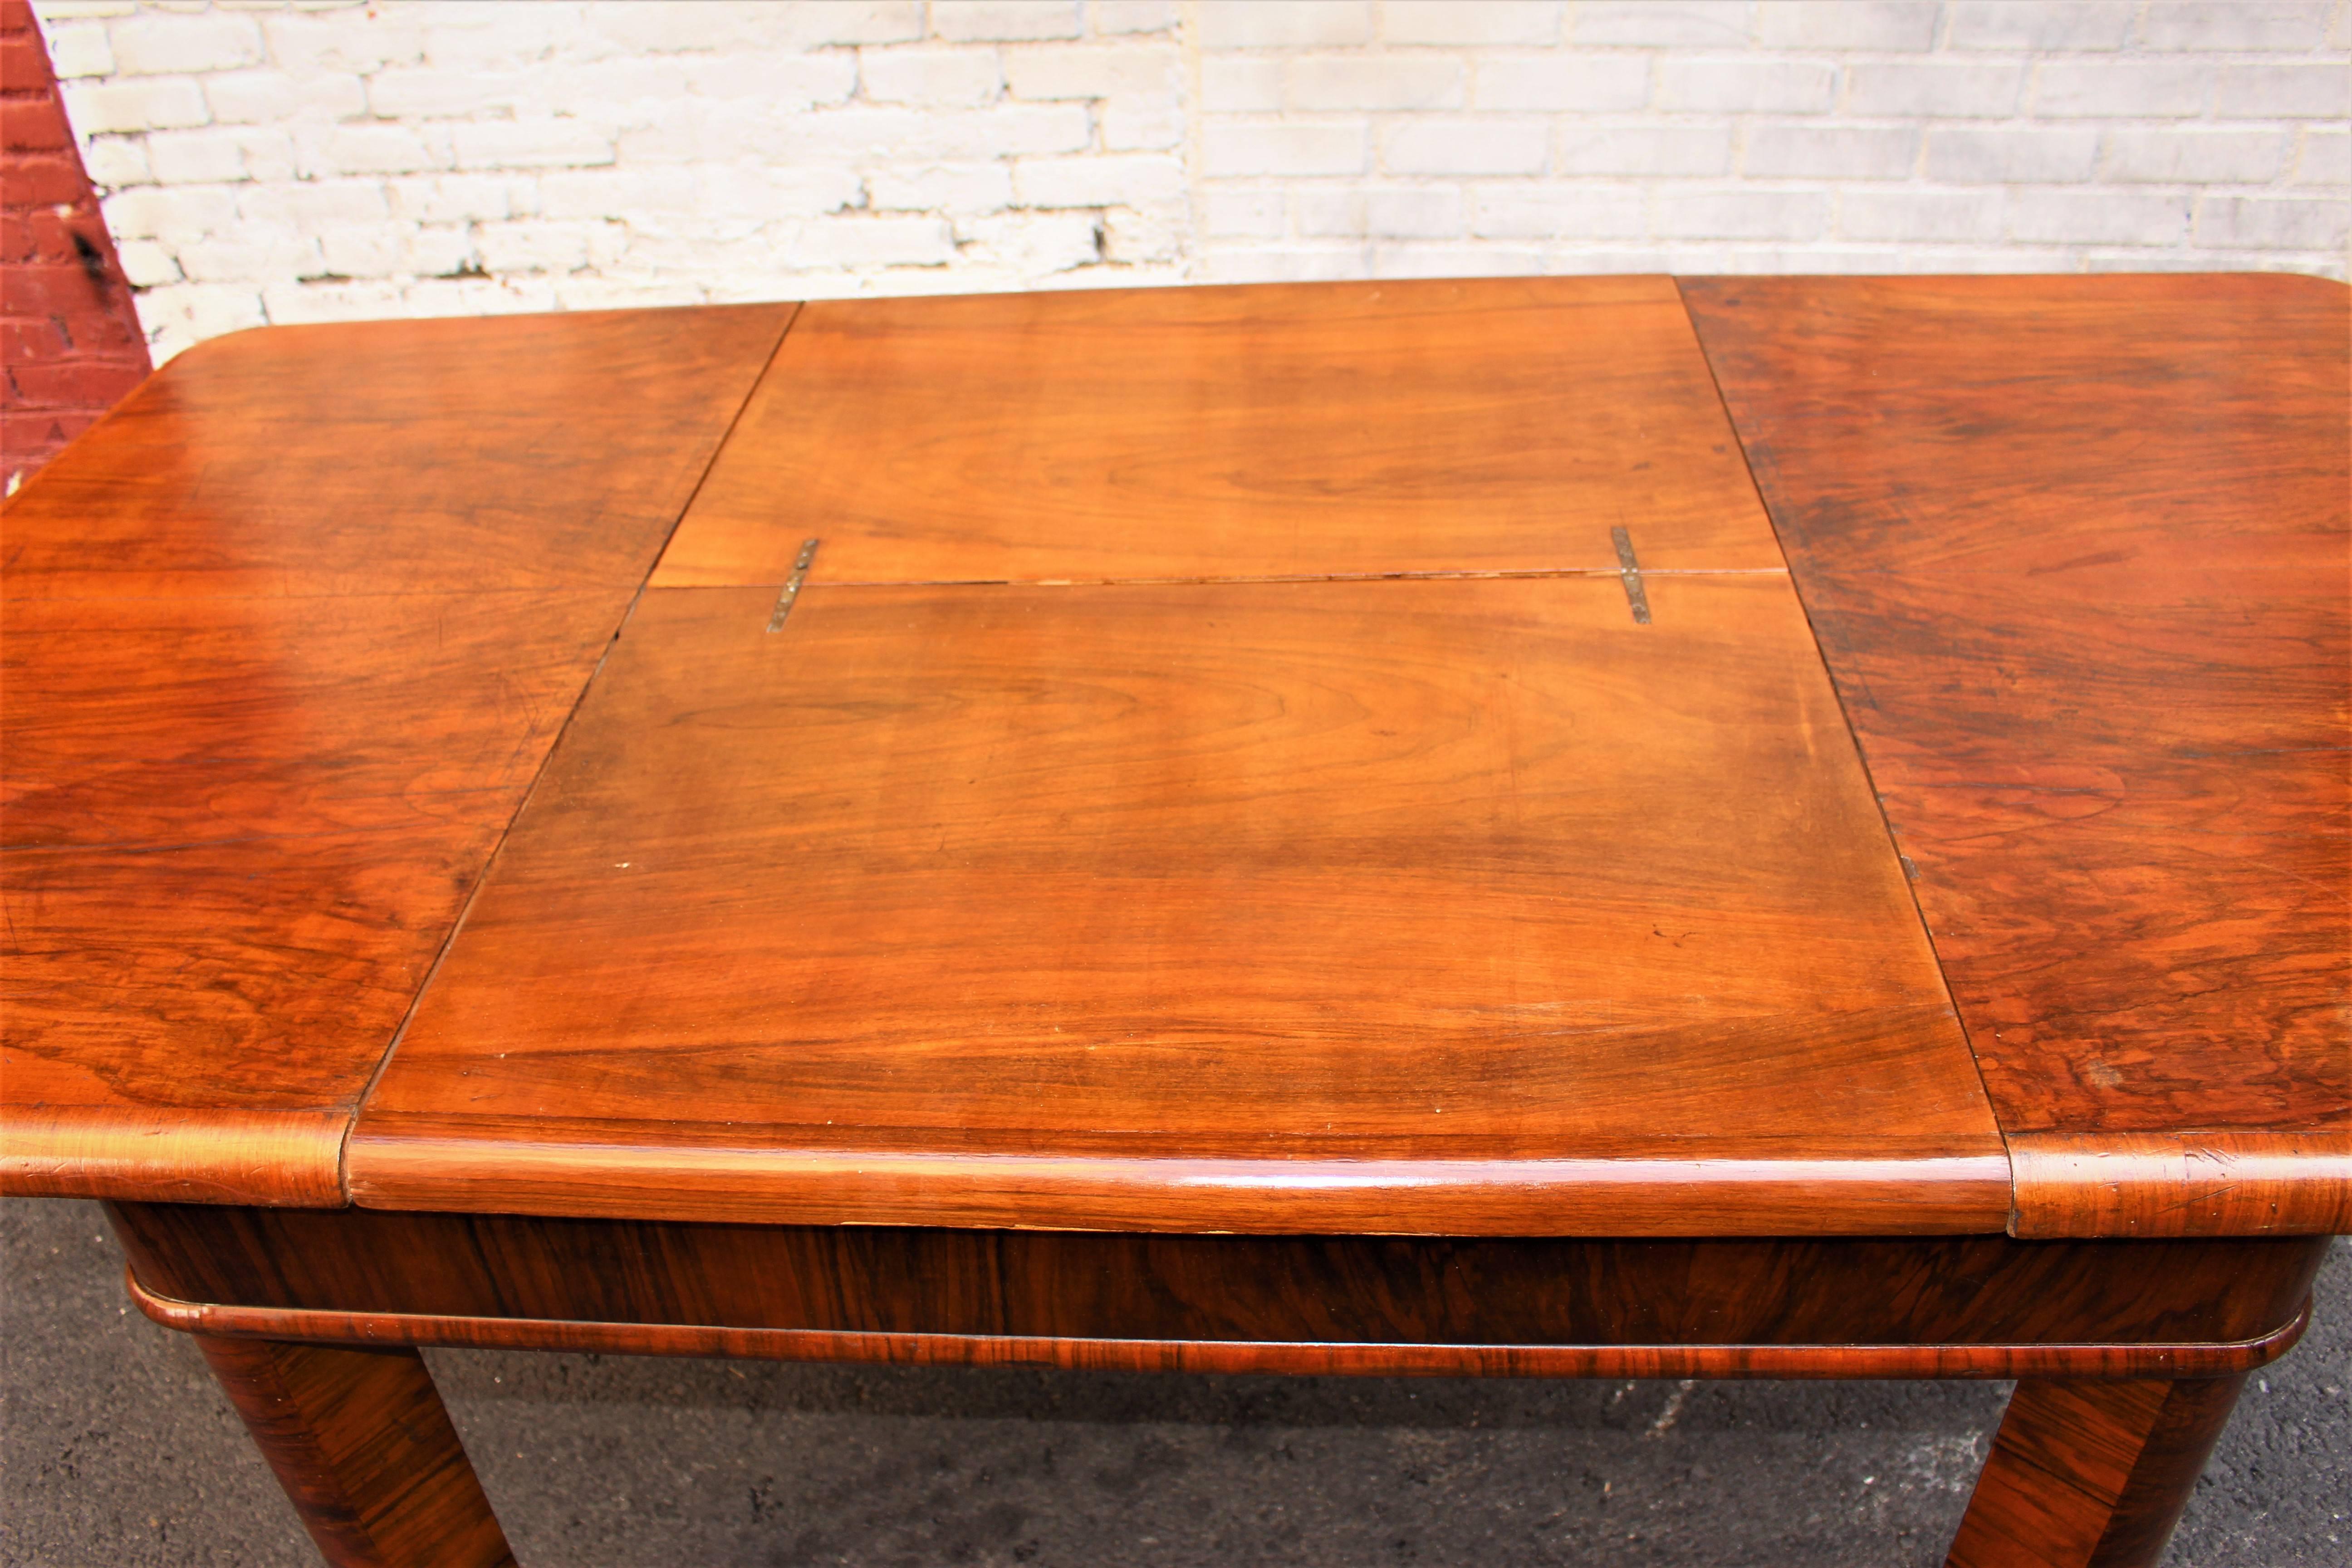 French Art Deco table, the drop leaf fold up under the table and it is invisible table full extended is 81 inches. Table seats 6 to 8 people. 
Walnut base and veneer.